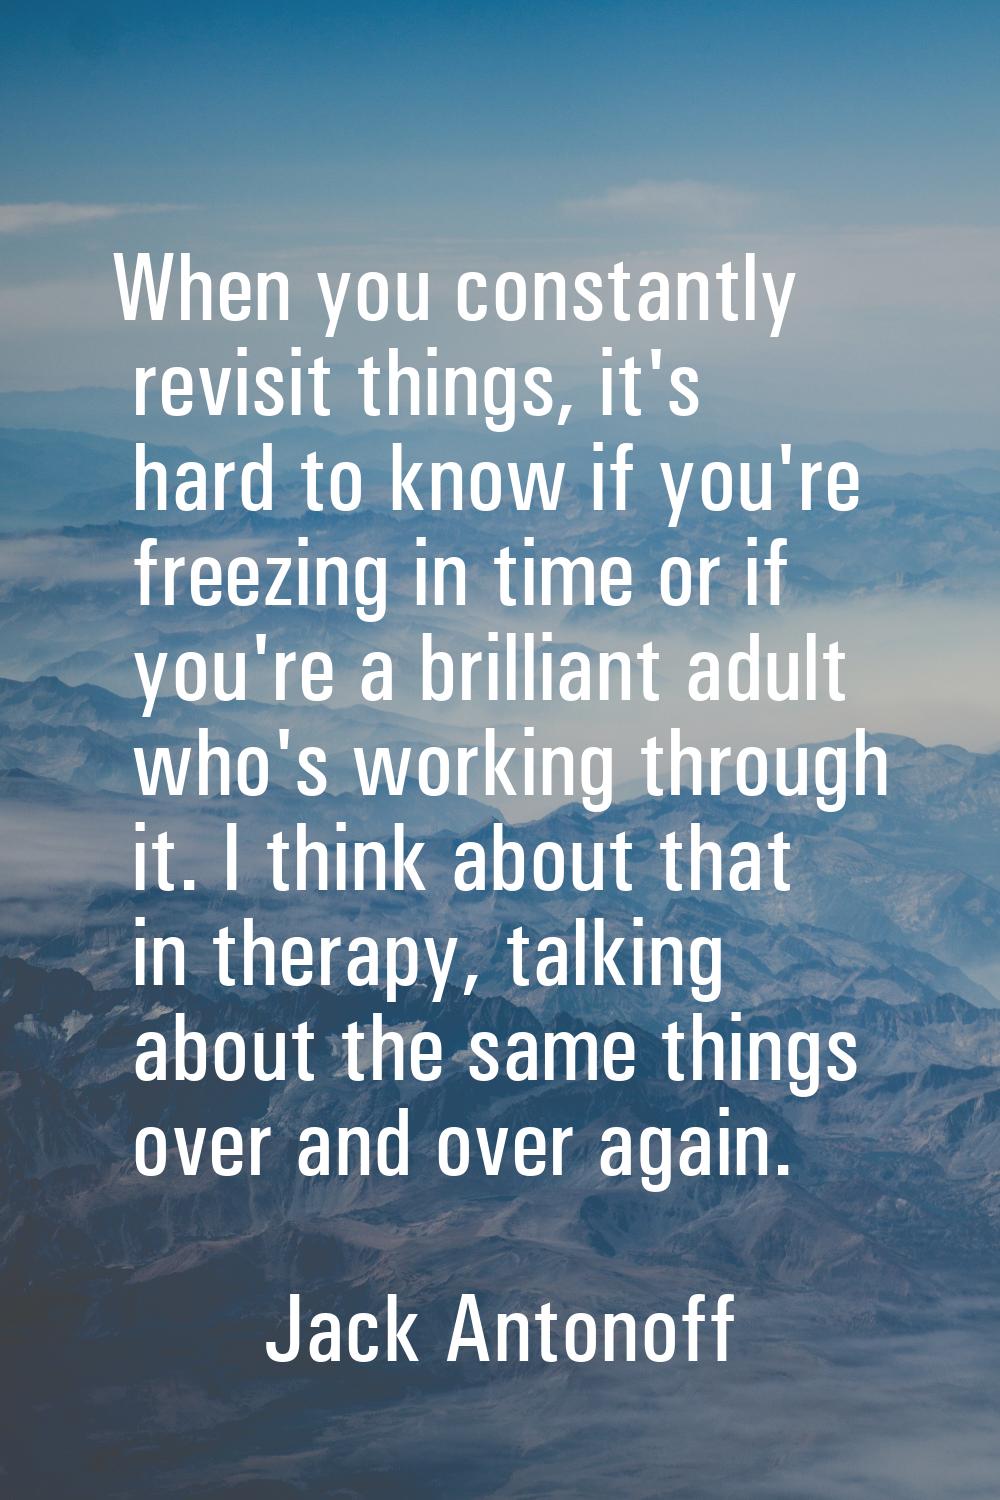 When you constantly revisit things, it's hard to know if you're freezing in time or if you're a bri